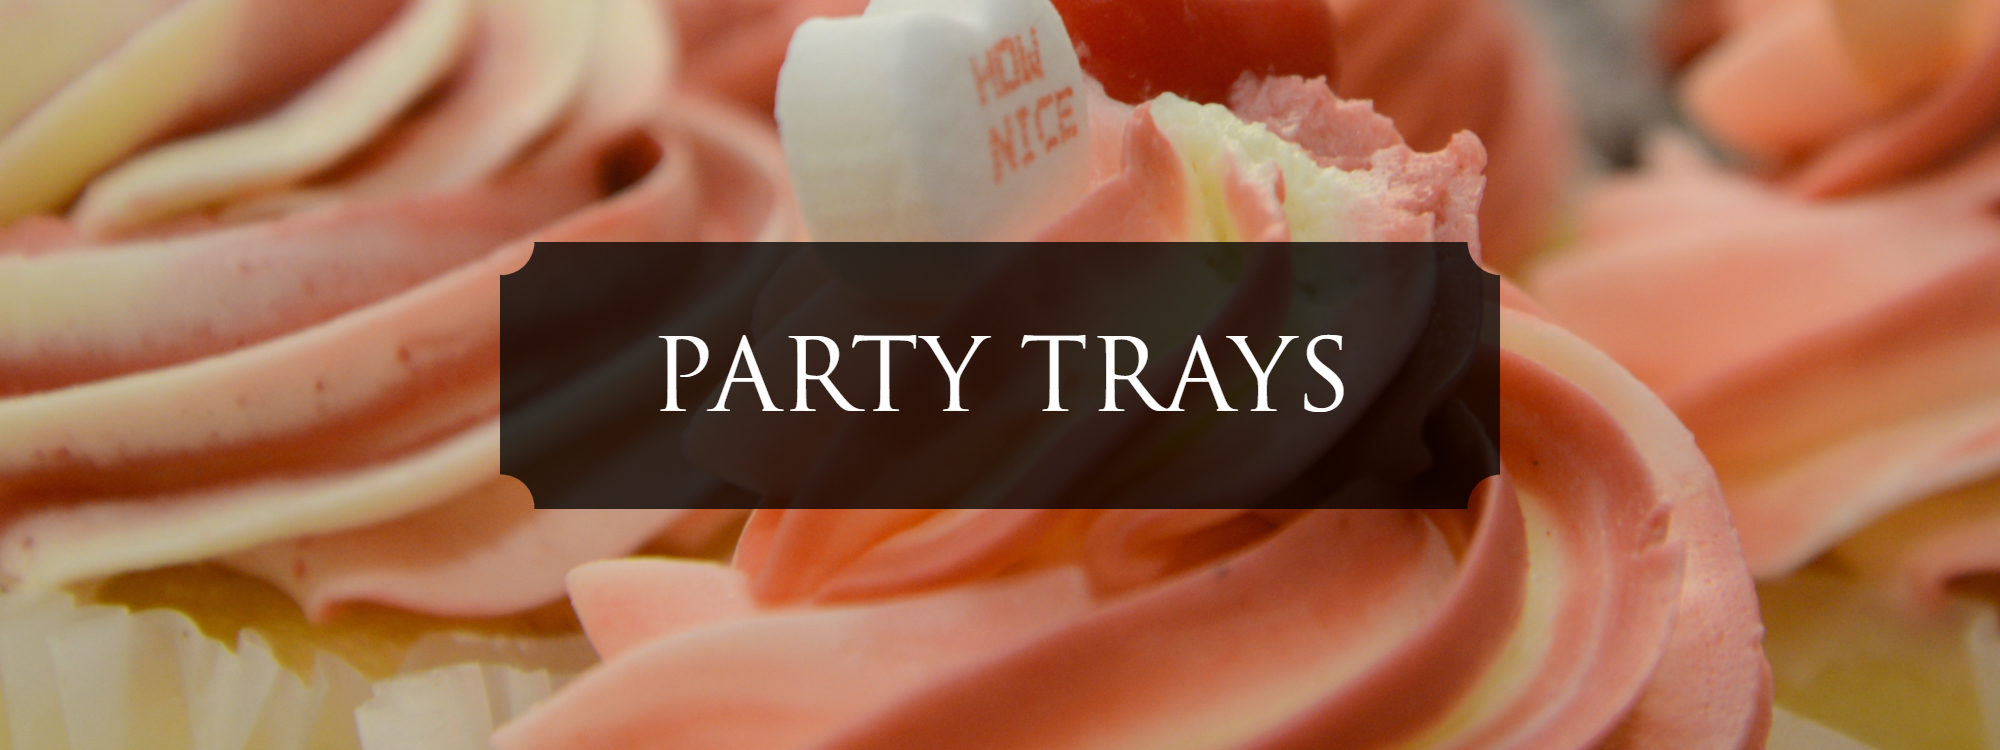 party trays banner.jpg